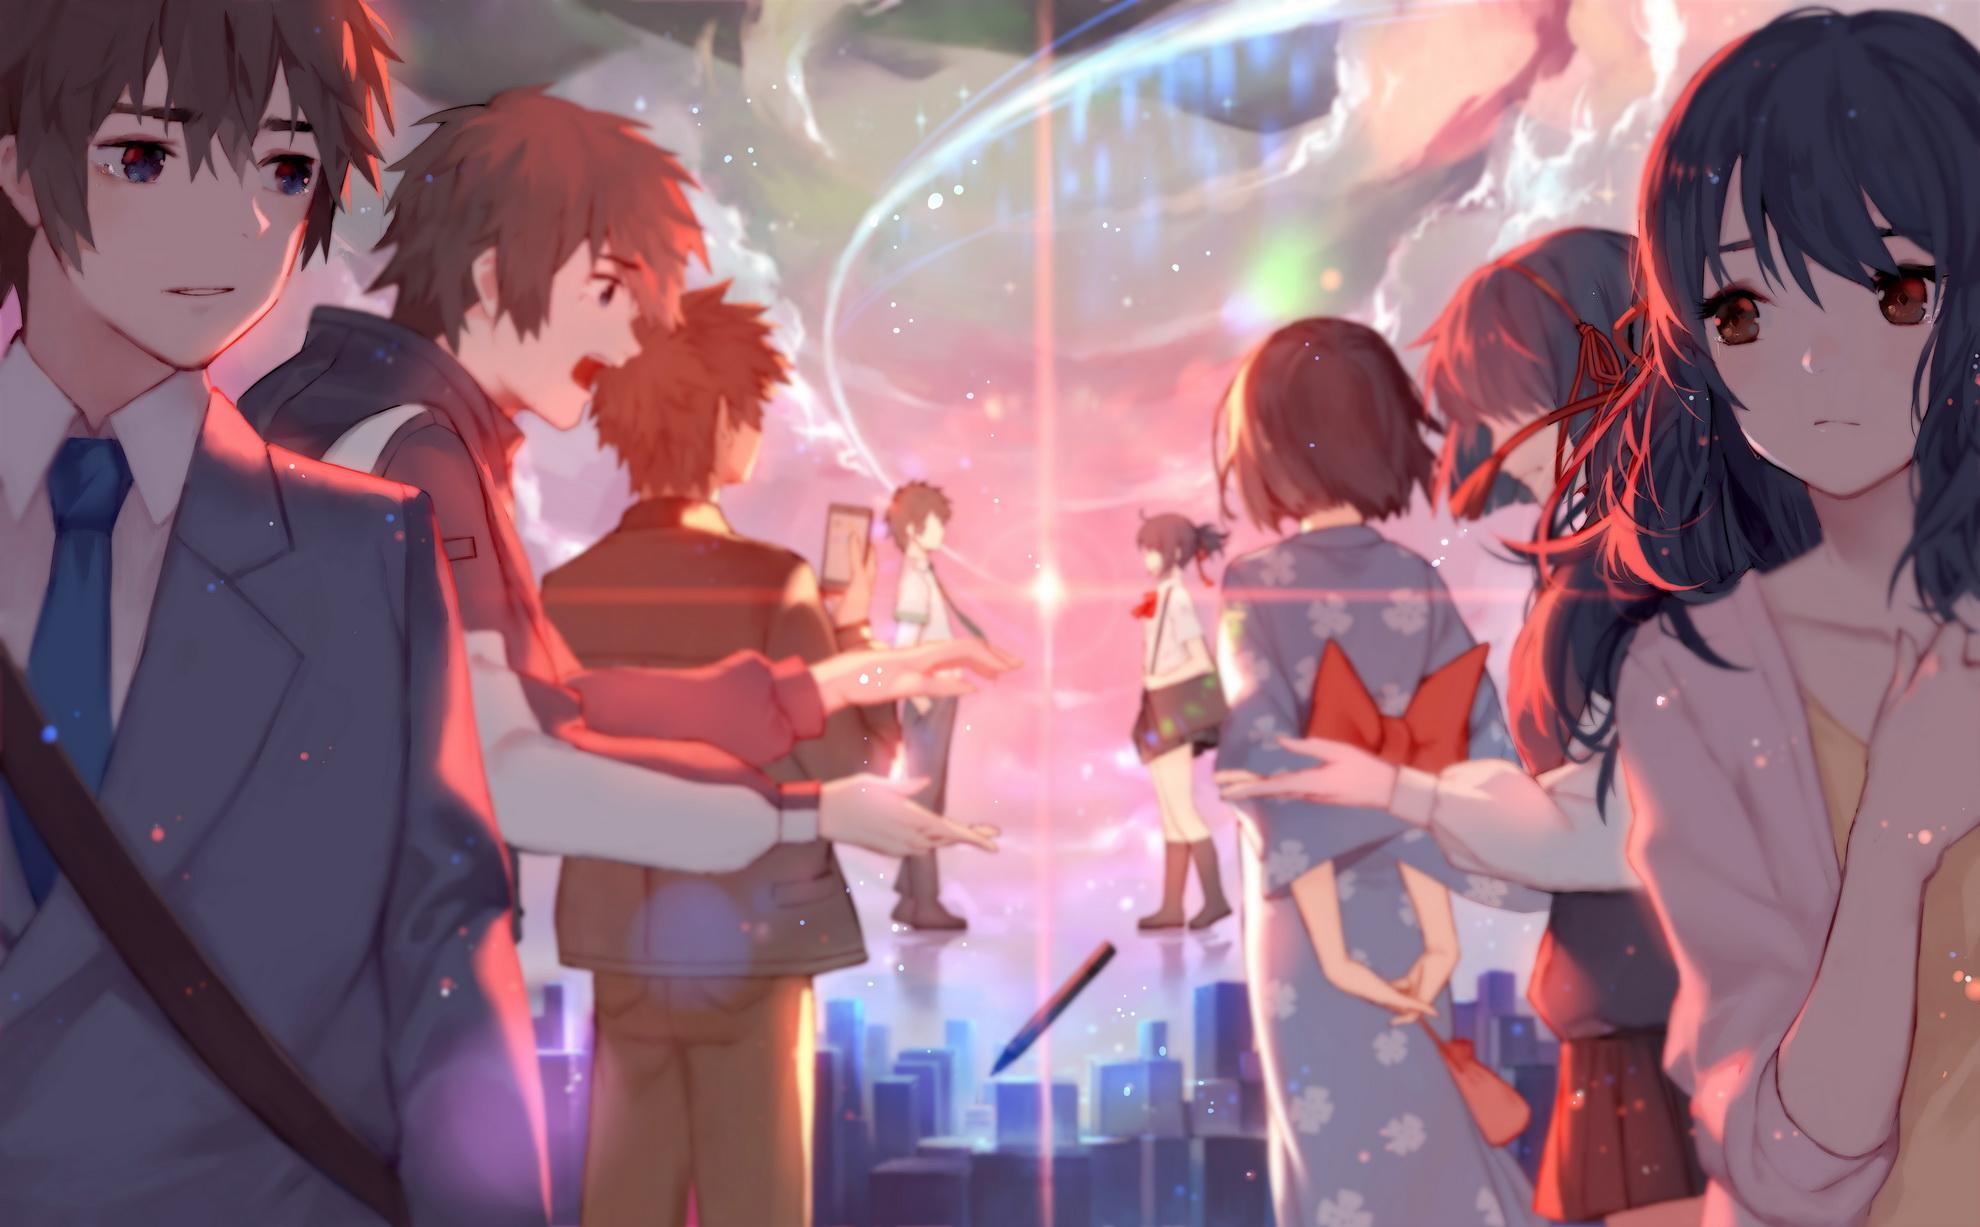 Your Name HD Wallpaper